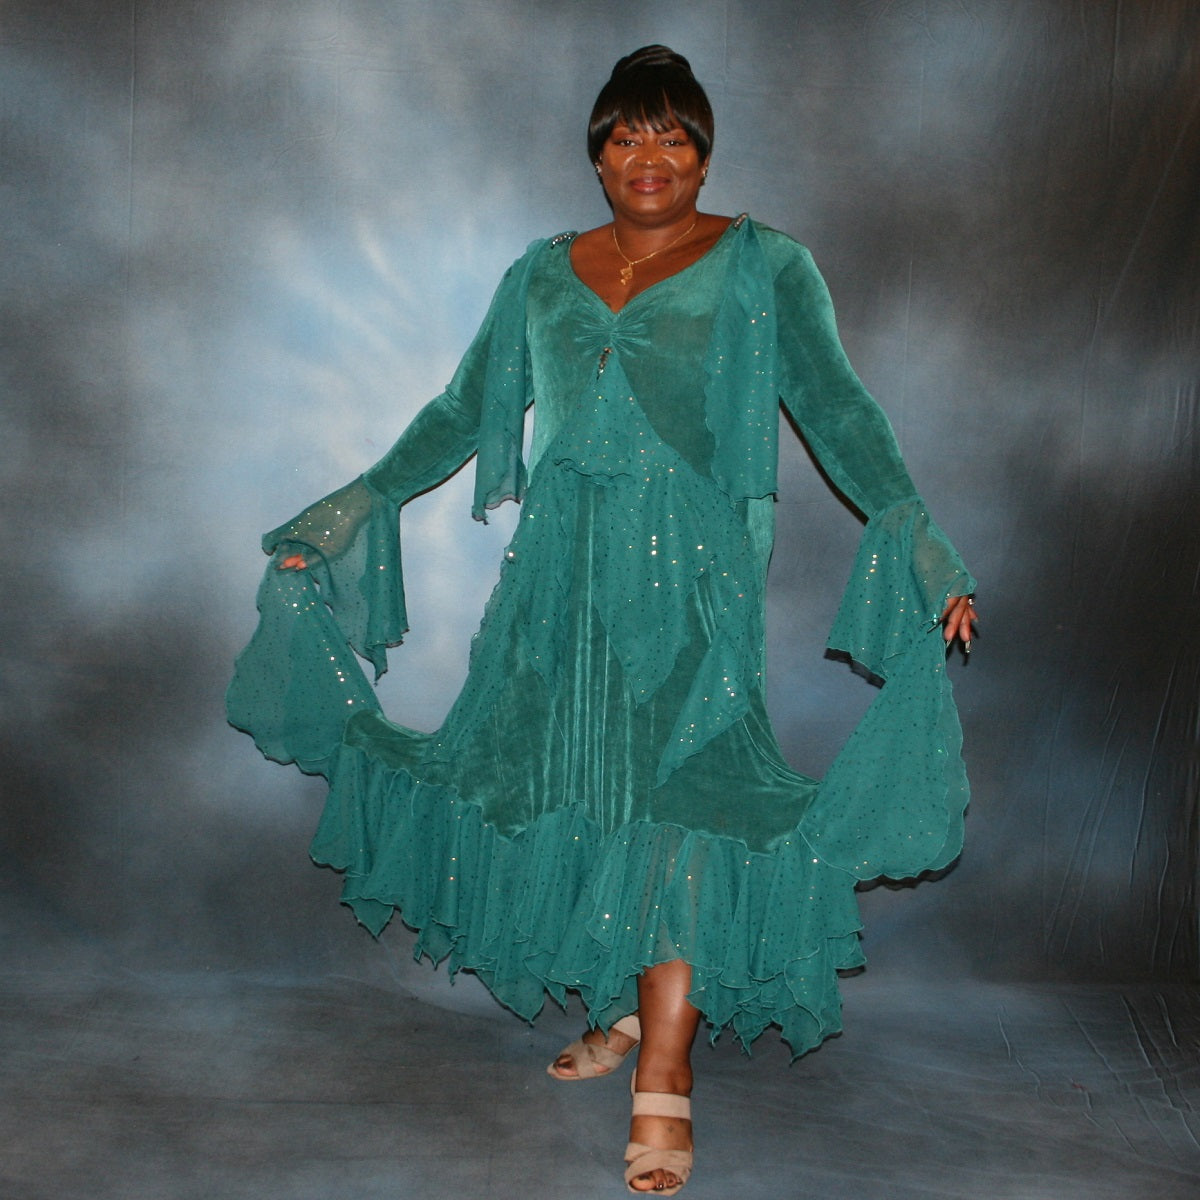 Teal plus size ballroom dance dress was created in luxurious teal solid slinky with oodles of champagne sequined chiffon flounces & floats, embellished with a lovely touch of Swarovski hand beading.